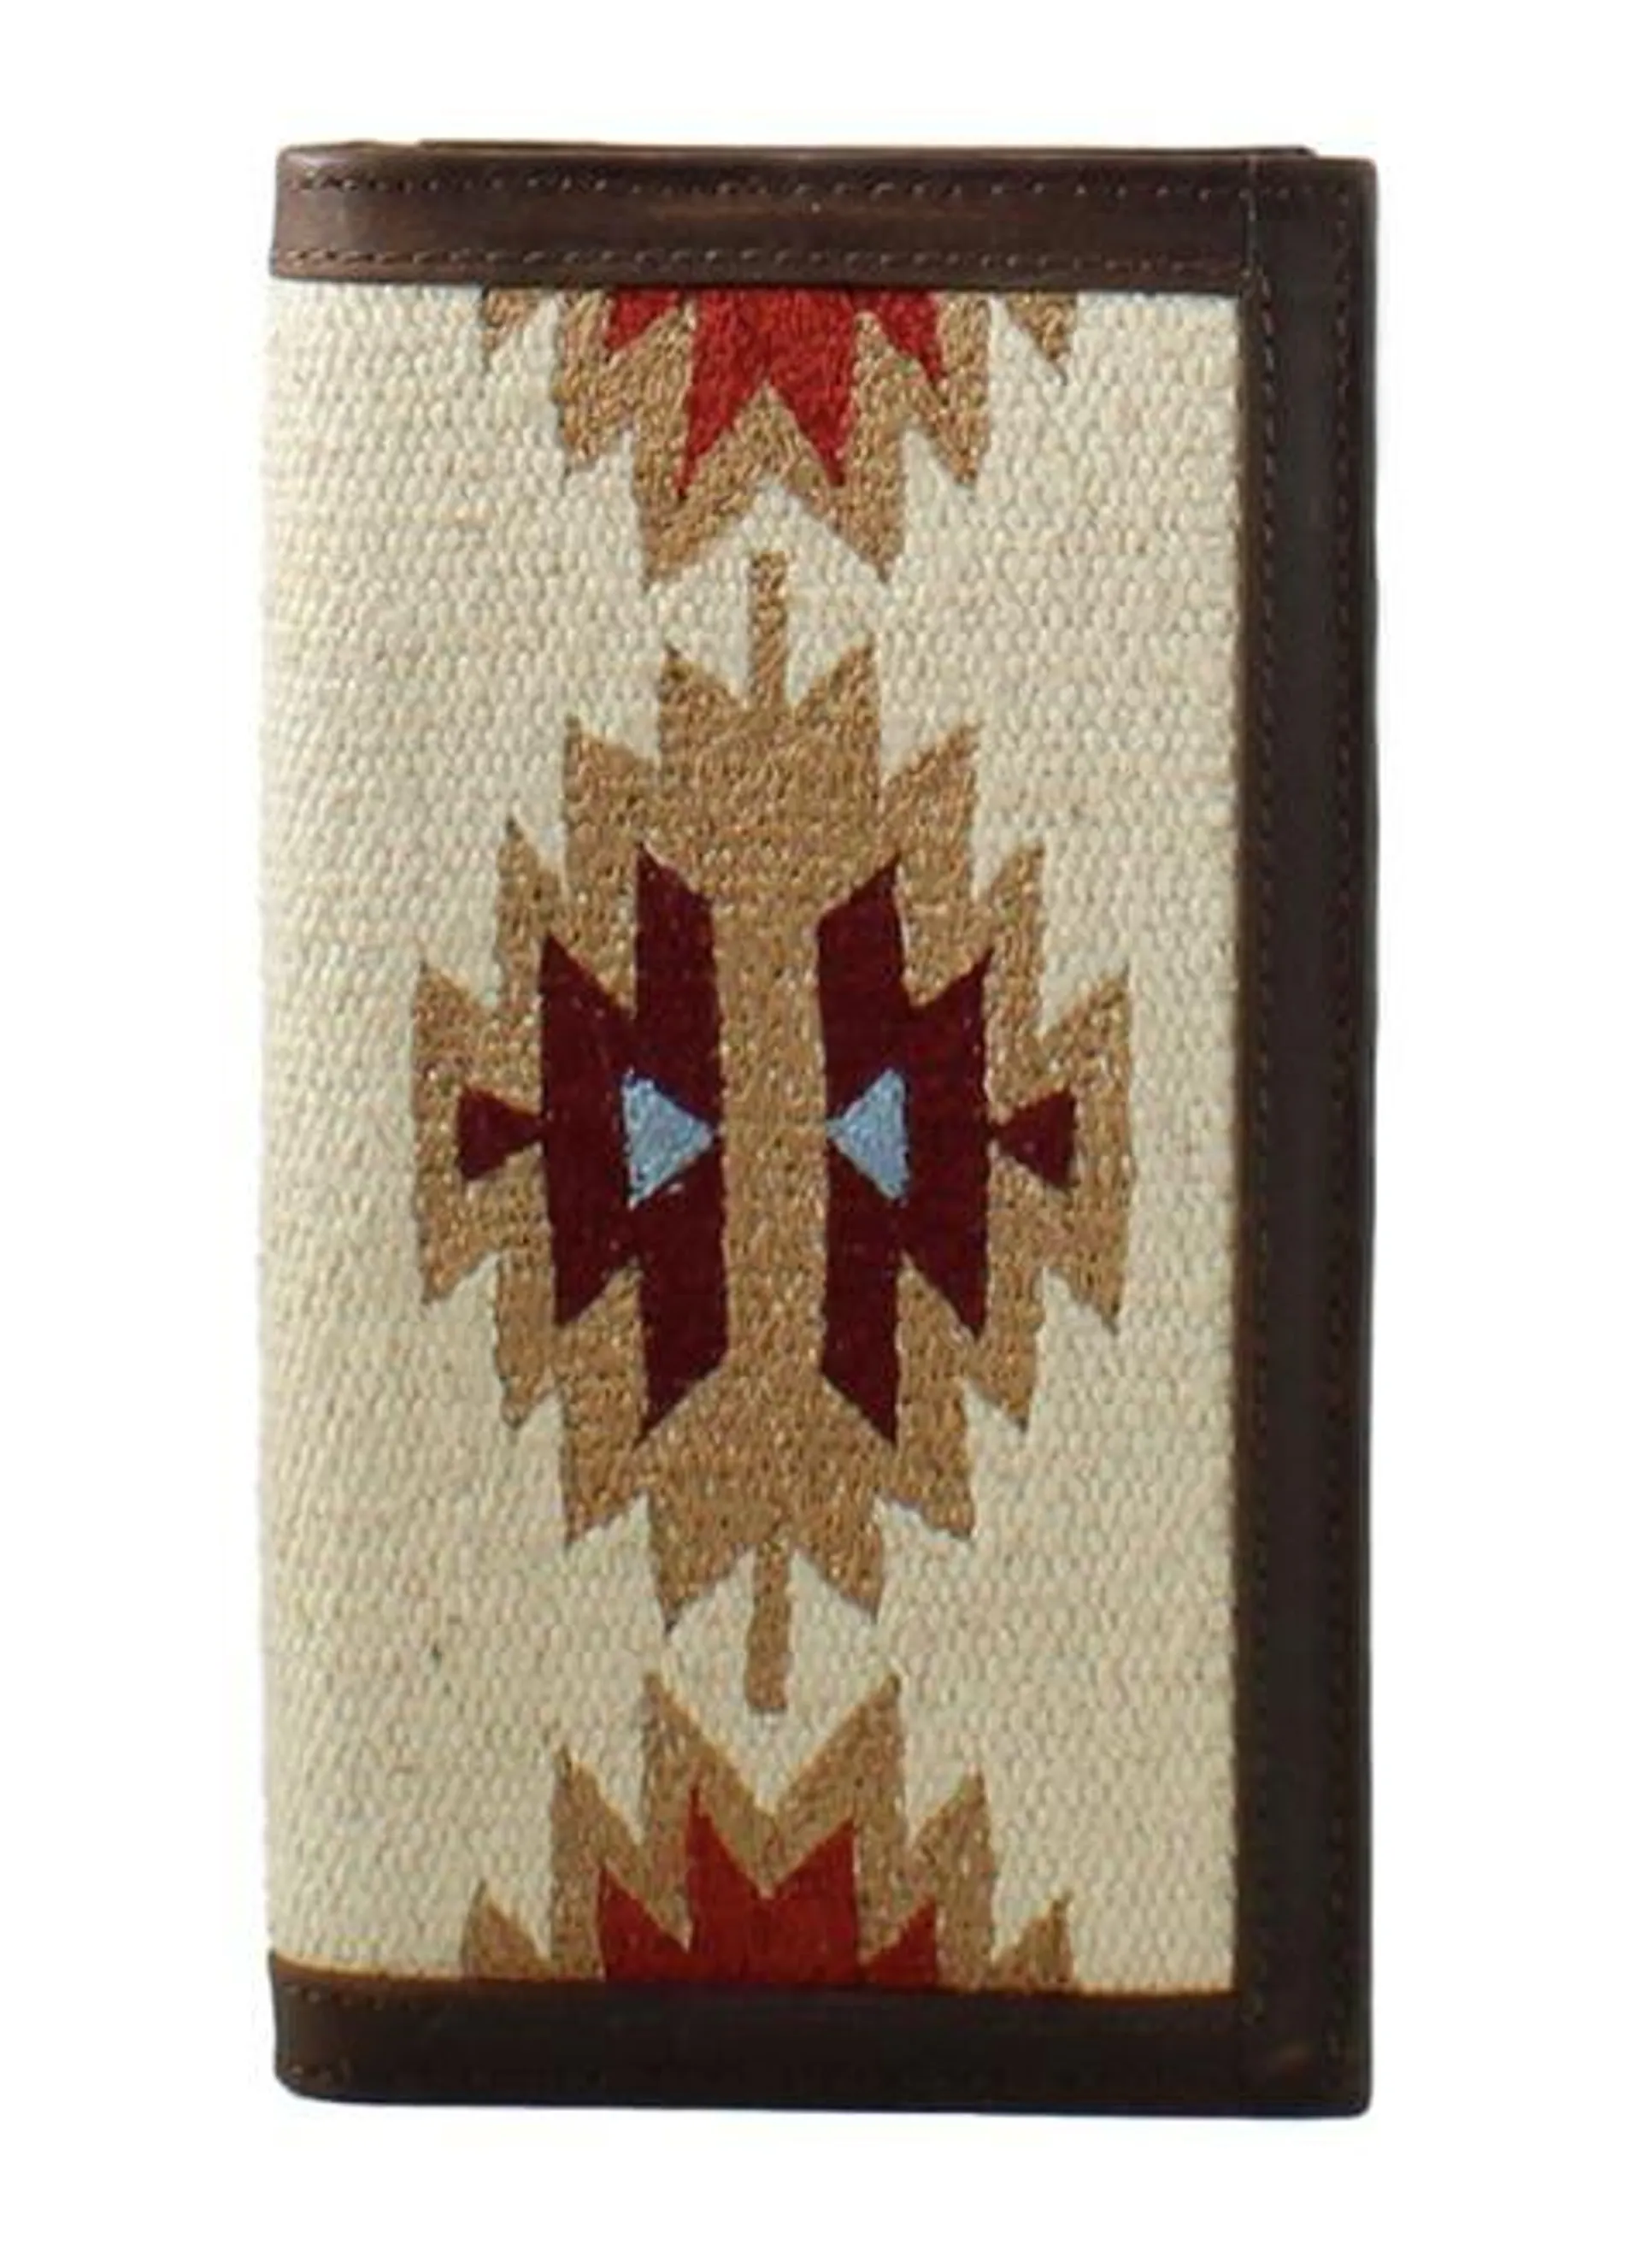 Nocona Rodeo Style Wallet with Aztec Rug Fabric and Leather Border